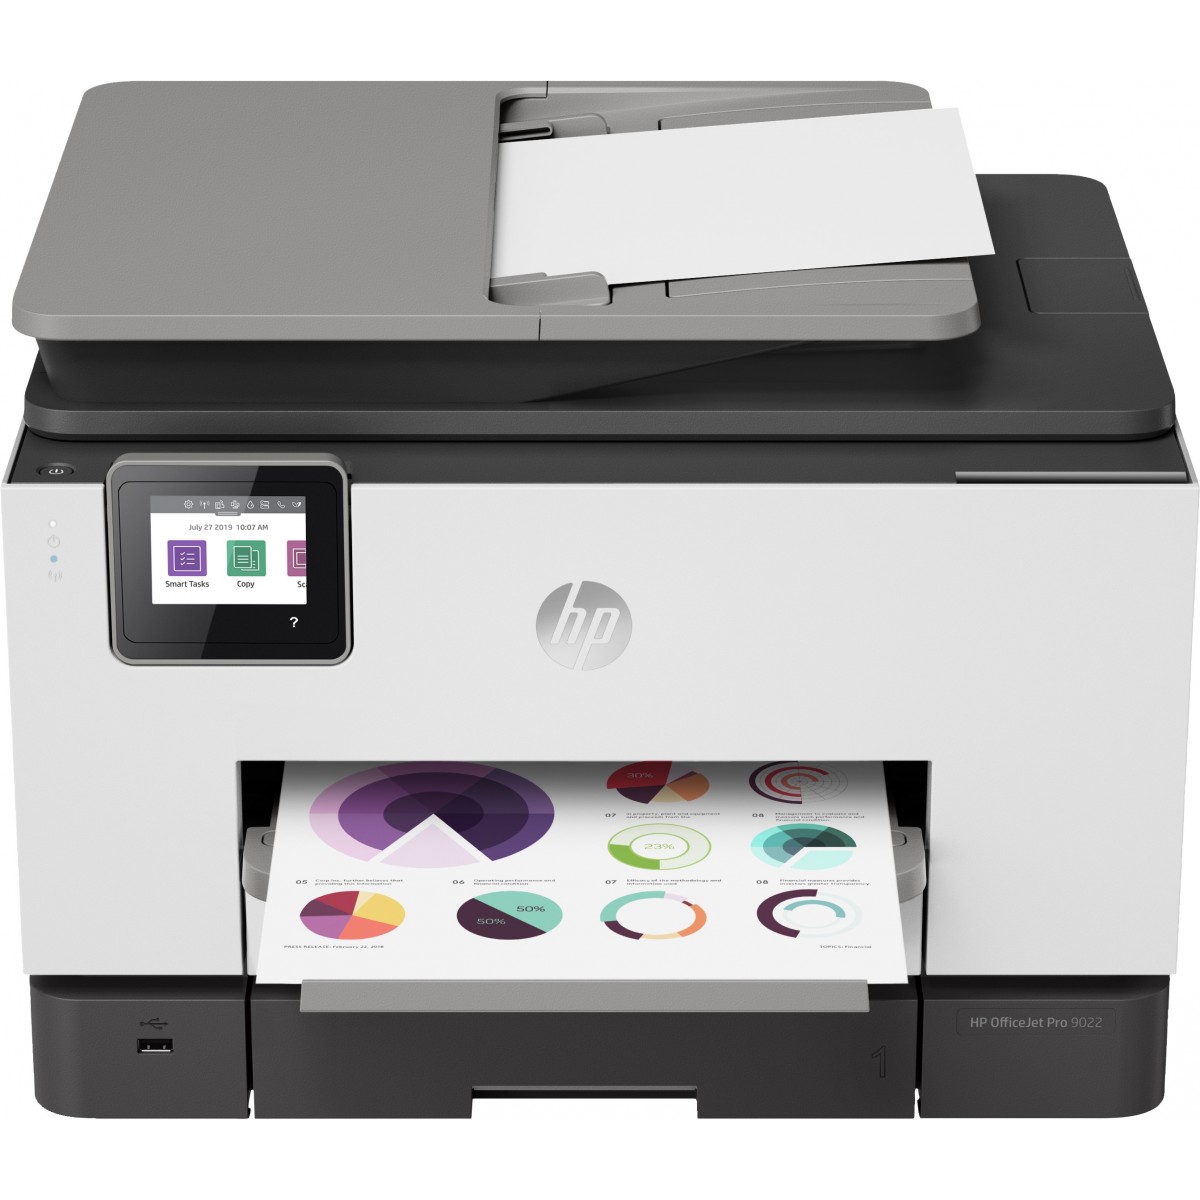 HP OfficeJet Pro 9022 All-in-one wireless printer Print,Scan,Copy from your phone - Instant Ink ready & voice activated (works w